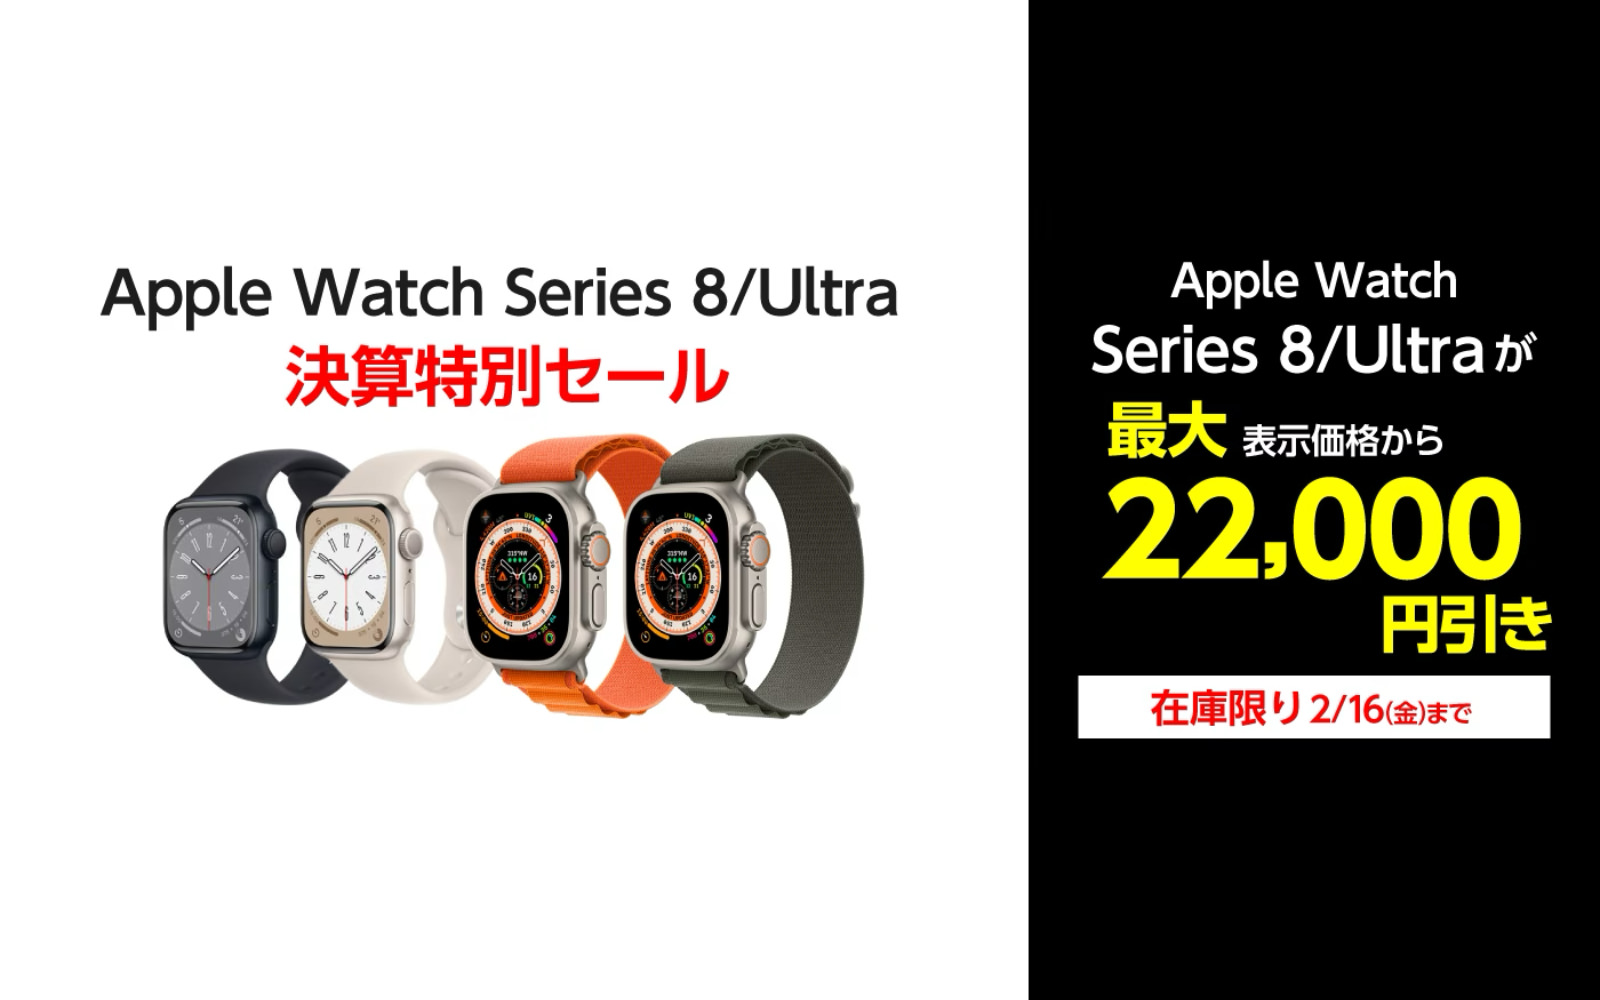 Apple Watch Series8 and Ultra on sale